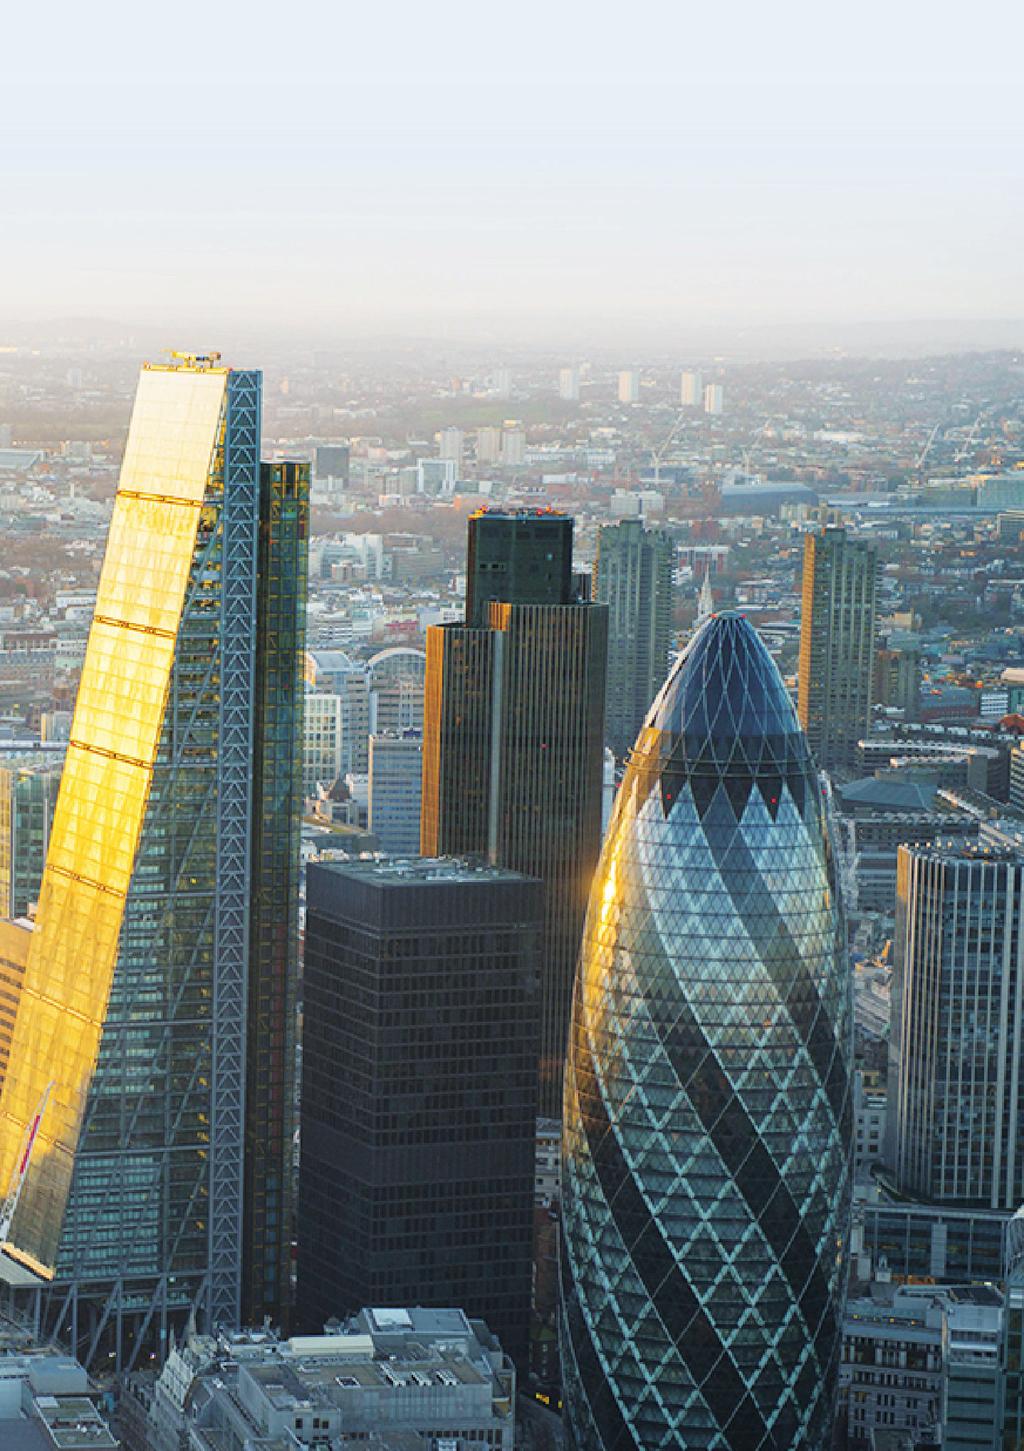 Strategic partnership with Leadenhall Capital Partners (LCP) L CP is an important part of MS Amlin s reinsurance business and is a core element of our on-going strategy A ssets Under Management of